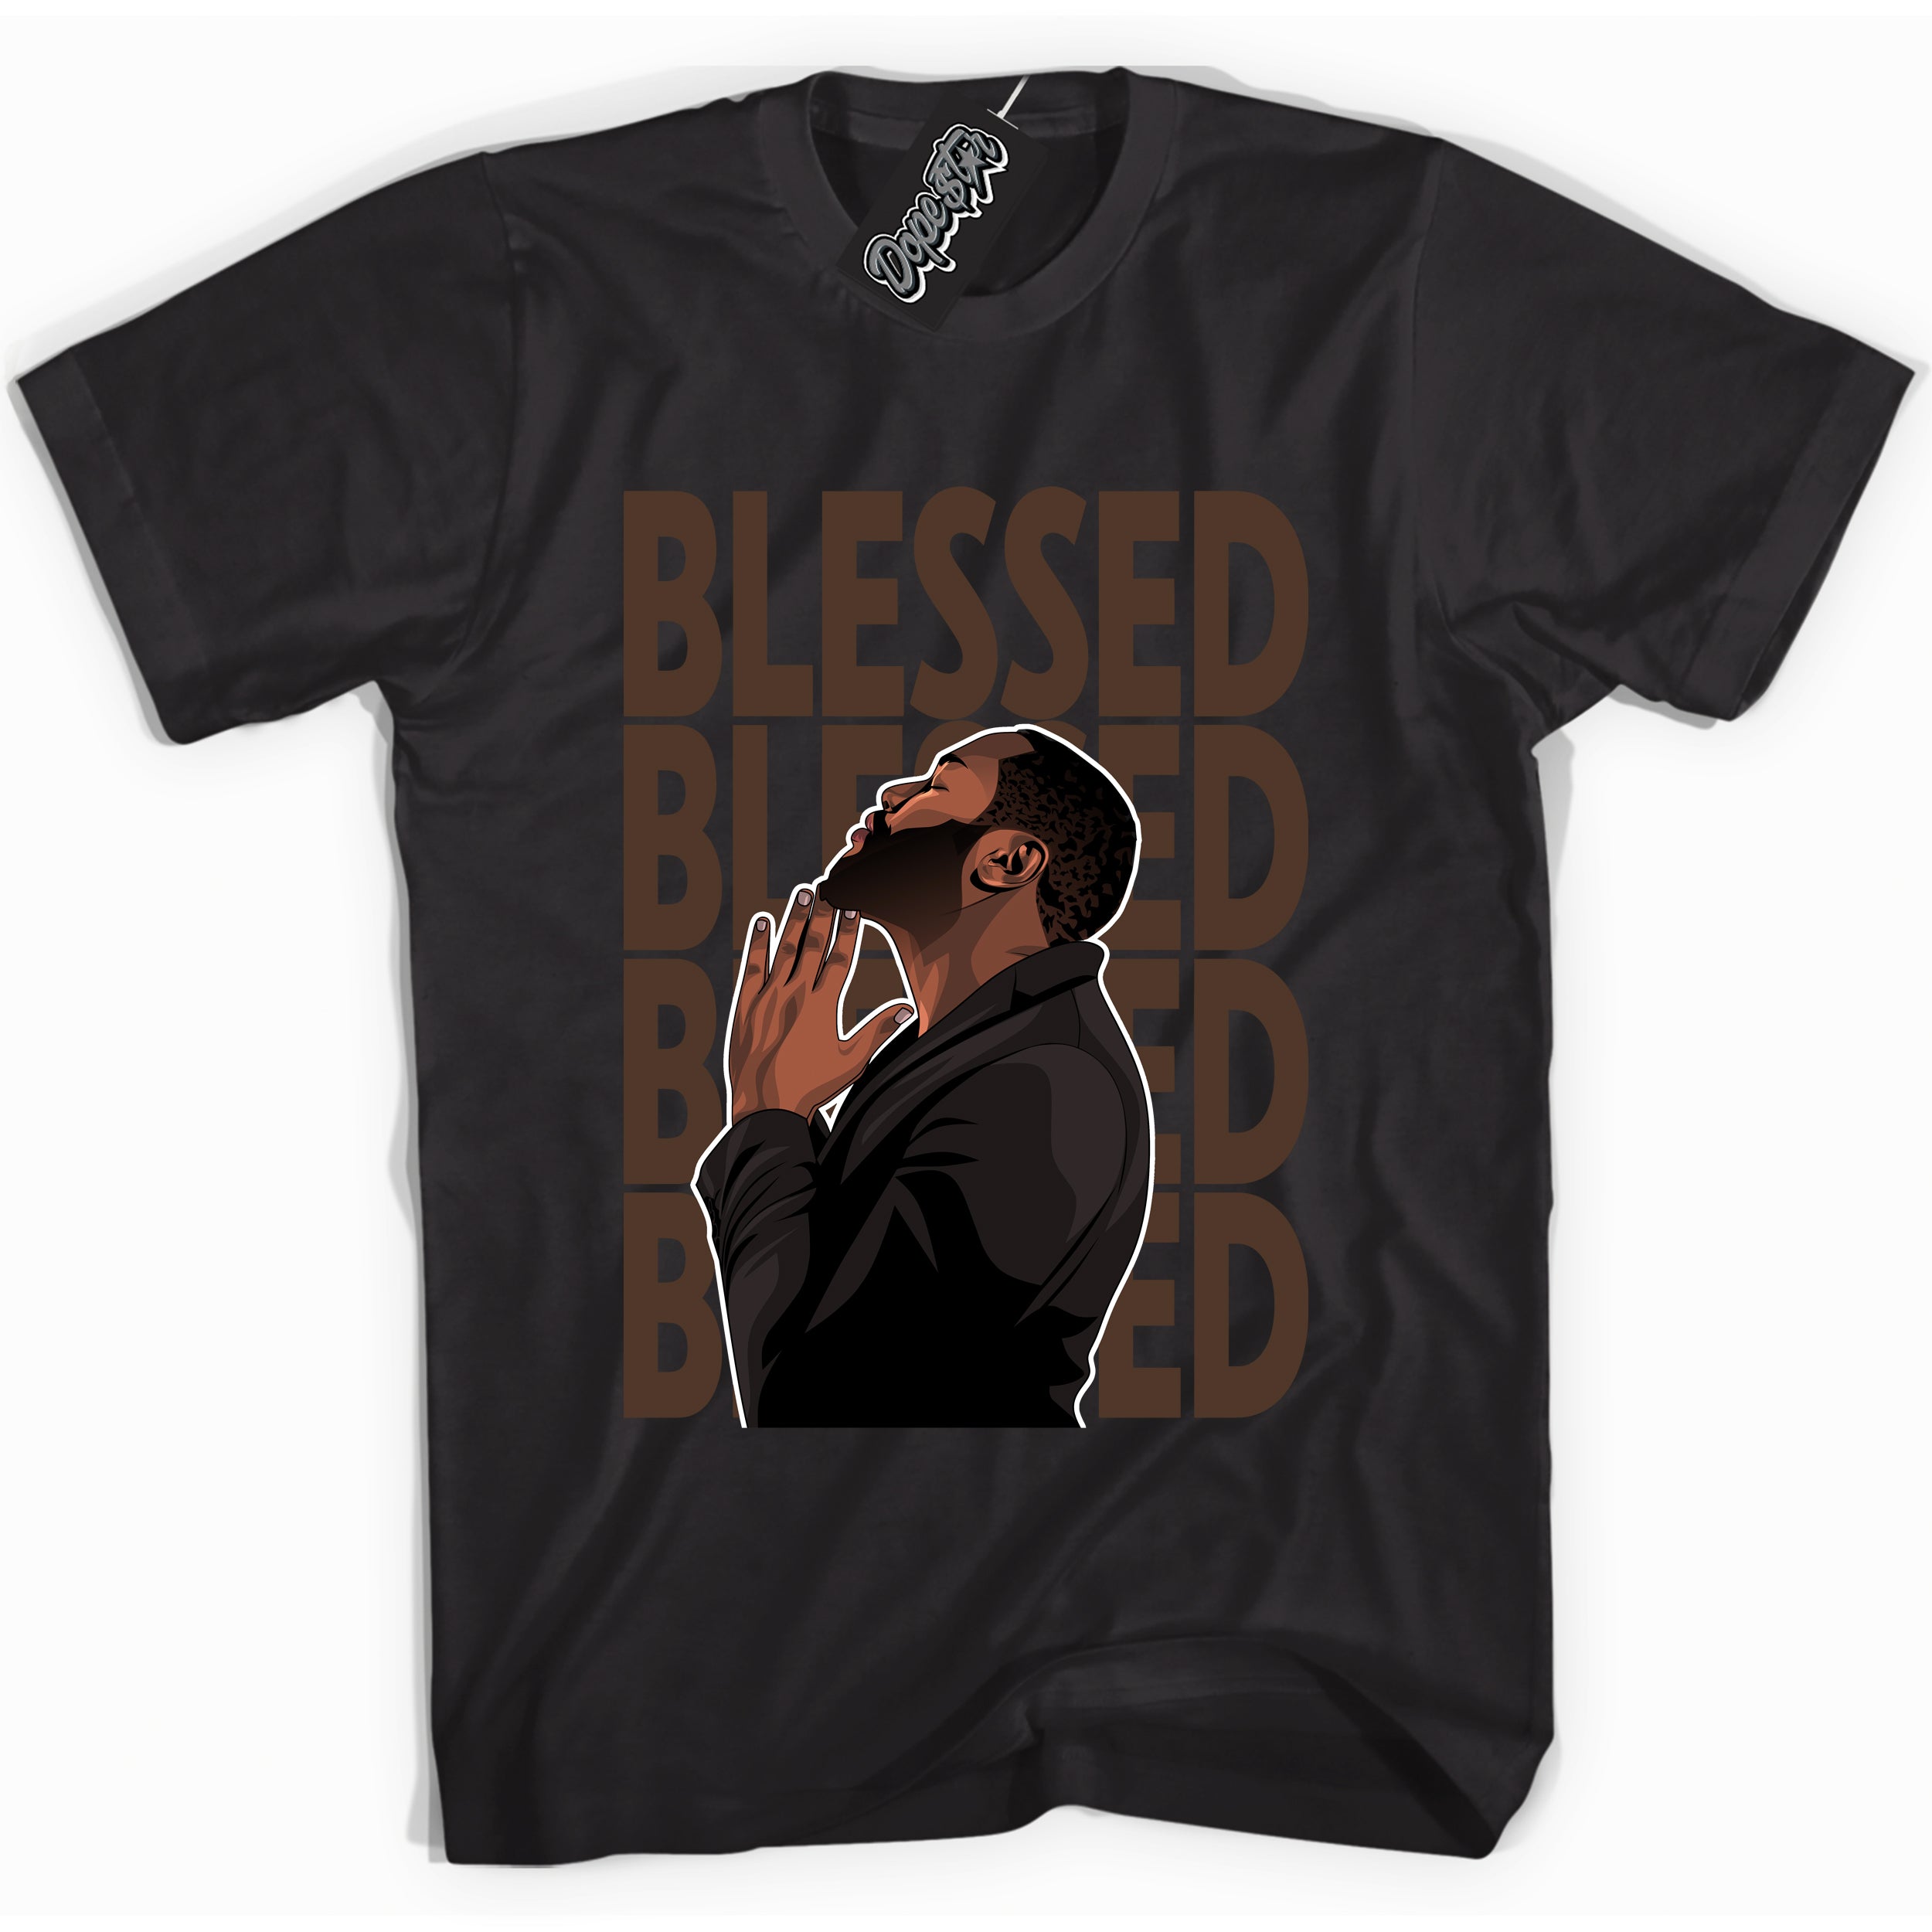 Cool Black graphic tee with “ God Blessed ” design, that perfectly matches Palomino 1s sneakers 